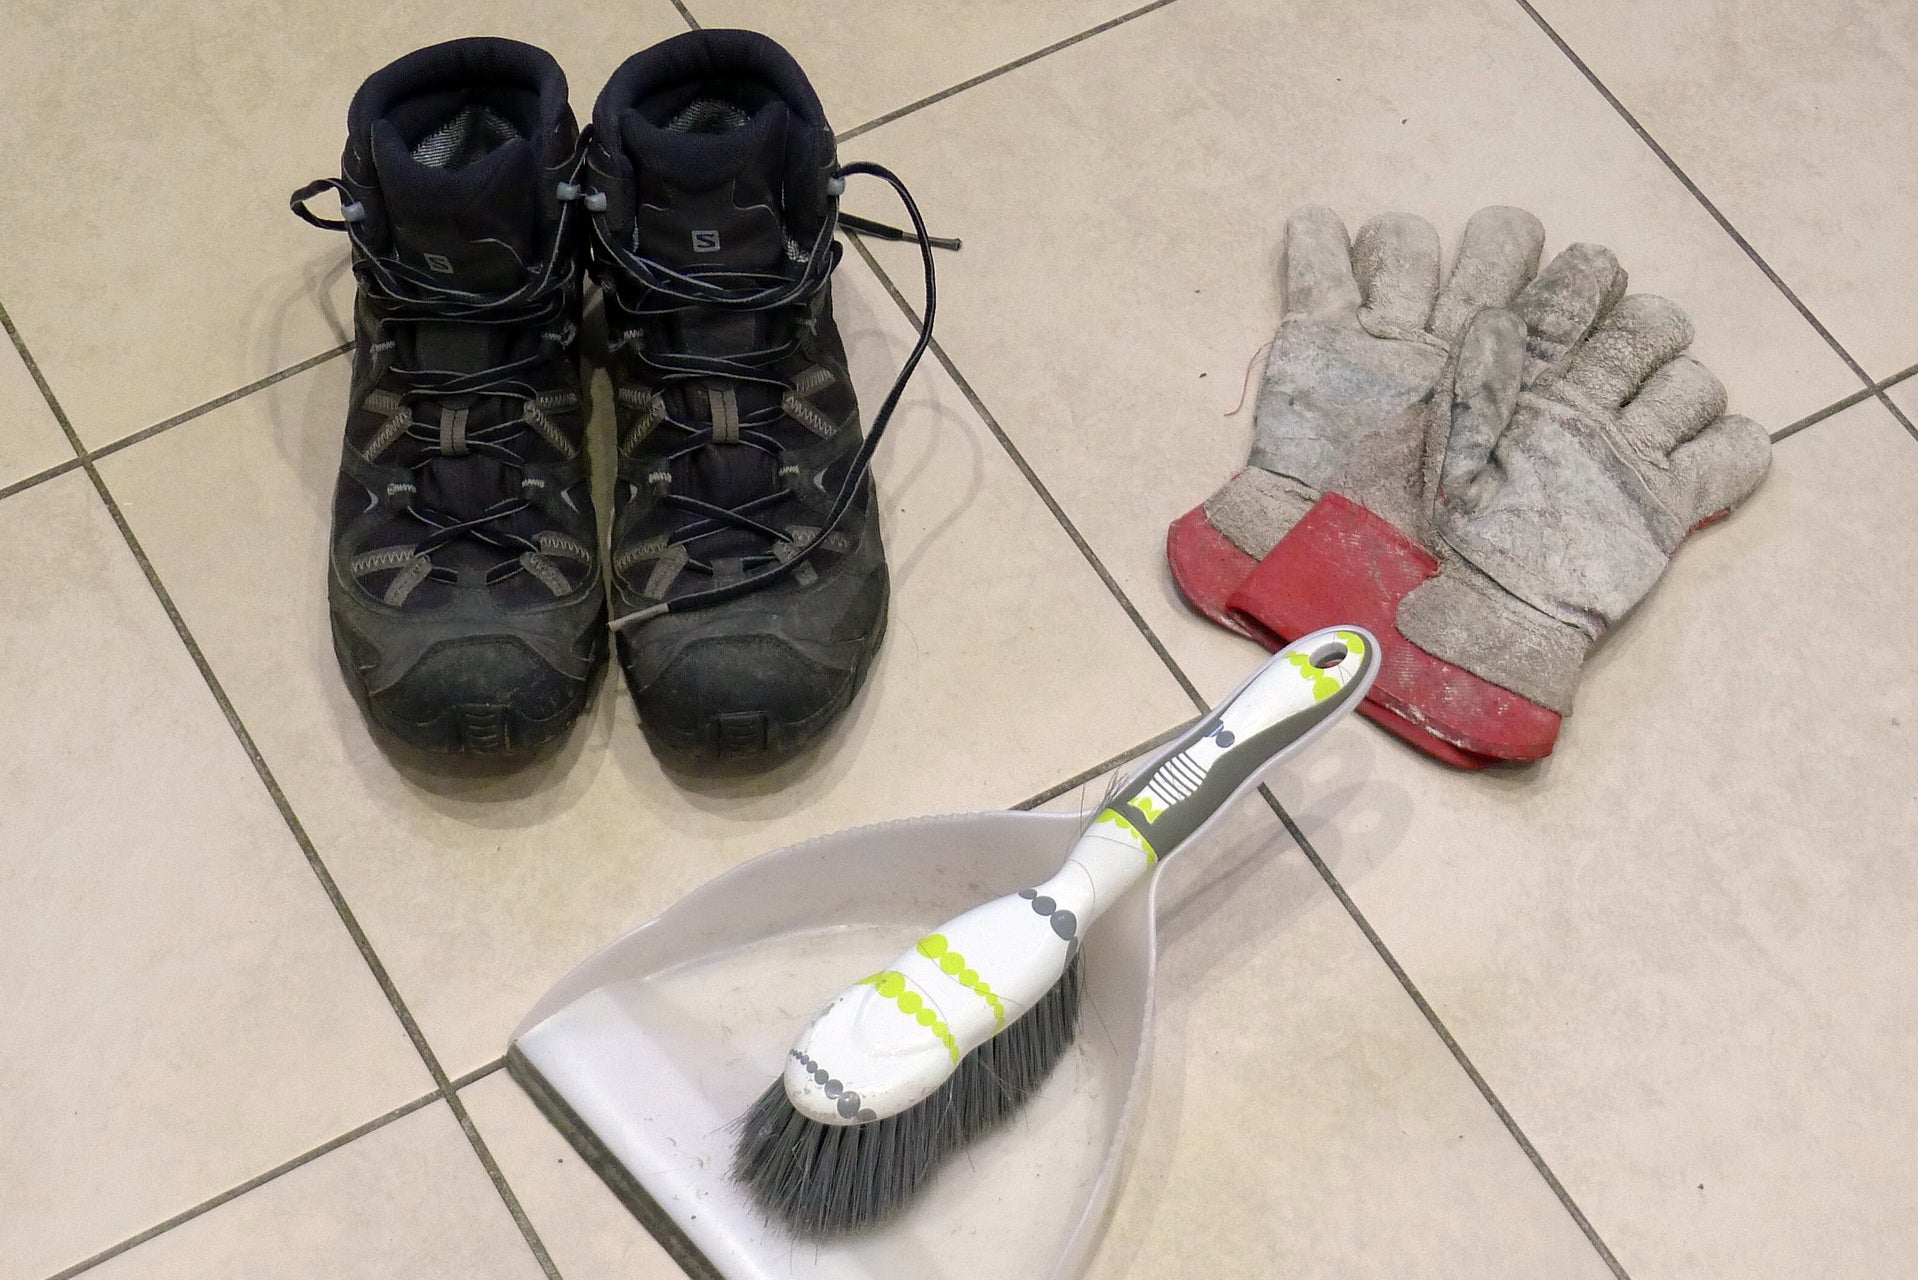 Thick-soled shoes, work gloves and a dustpan and brush